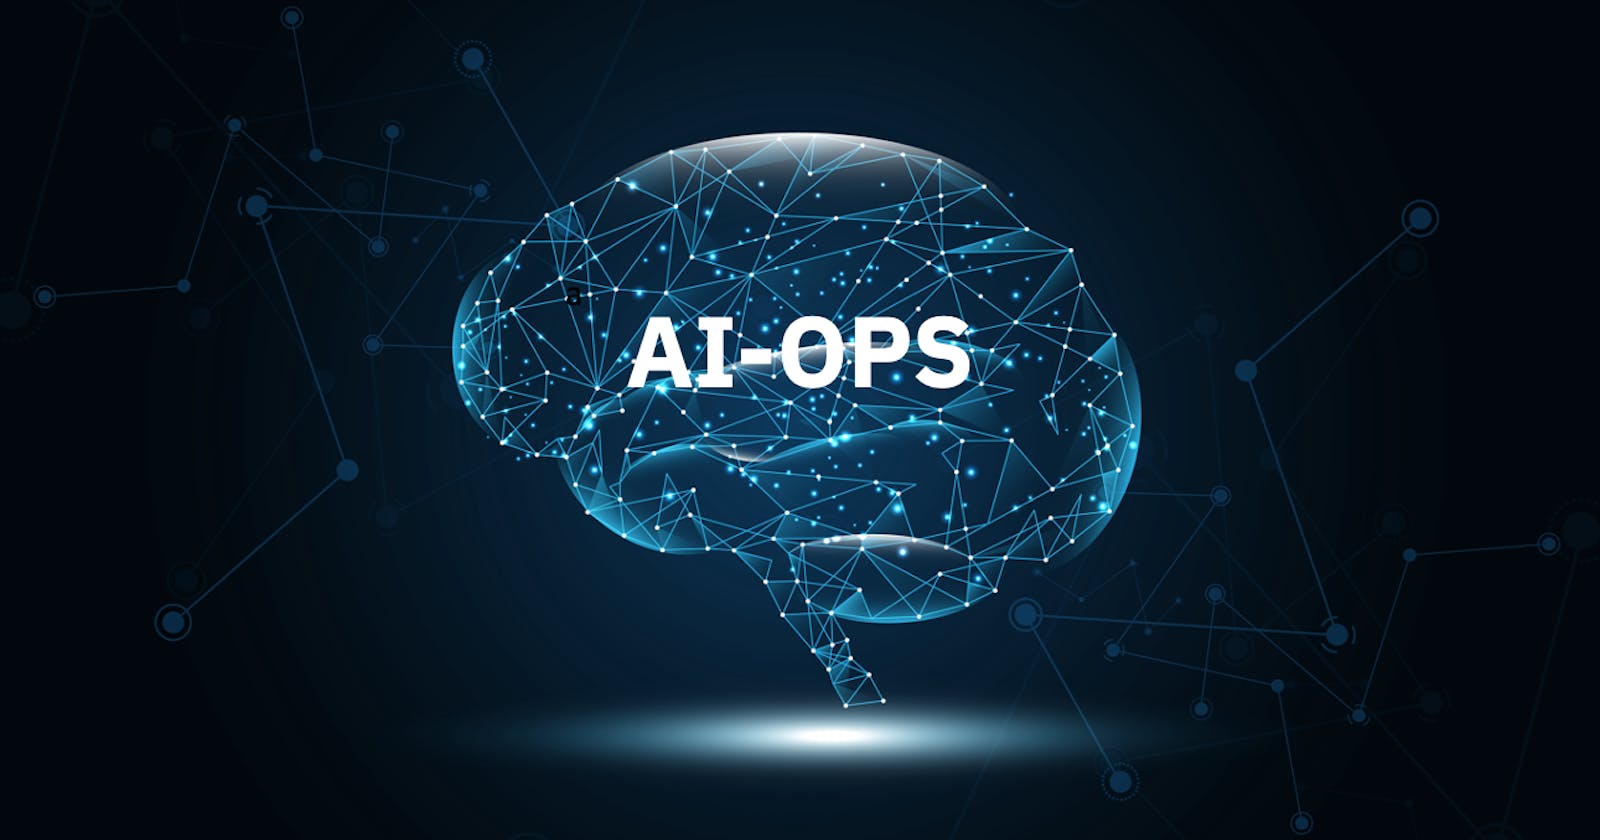 Say Goodbye to DevOps: The Rise of Platform Engineering and AIOps